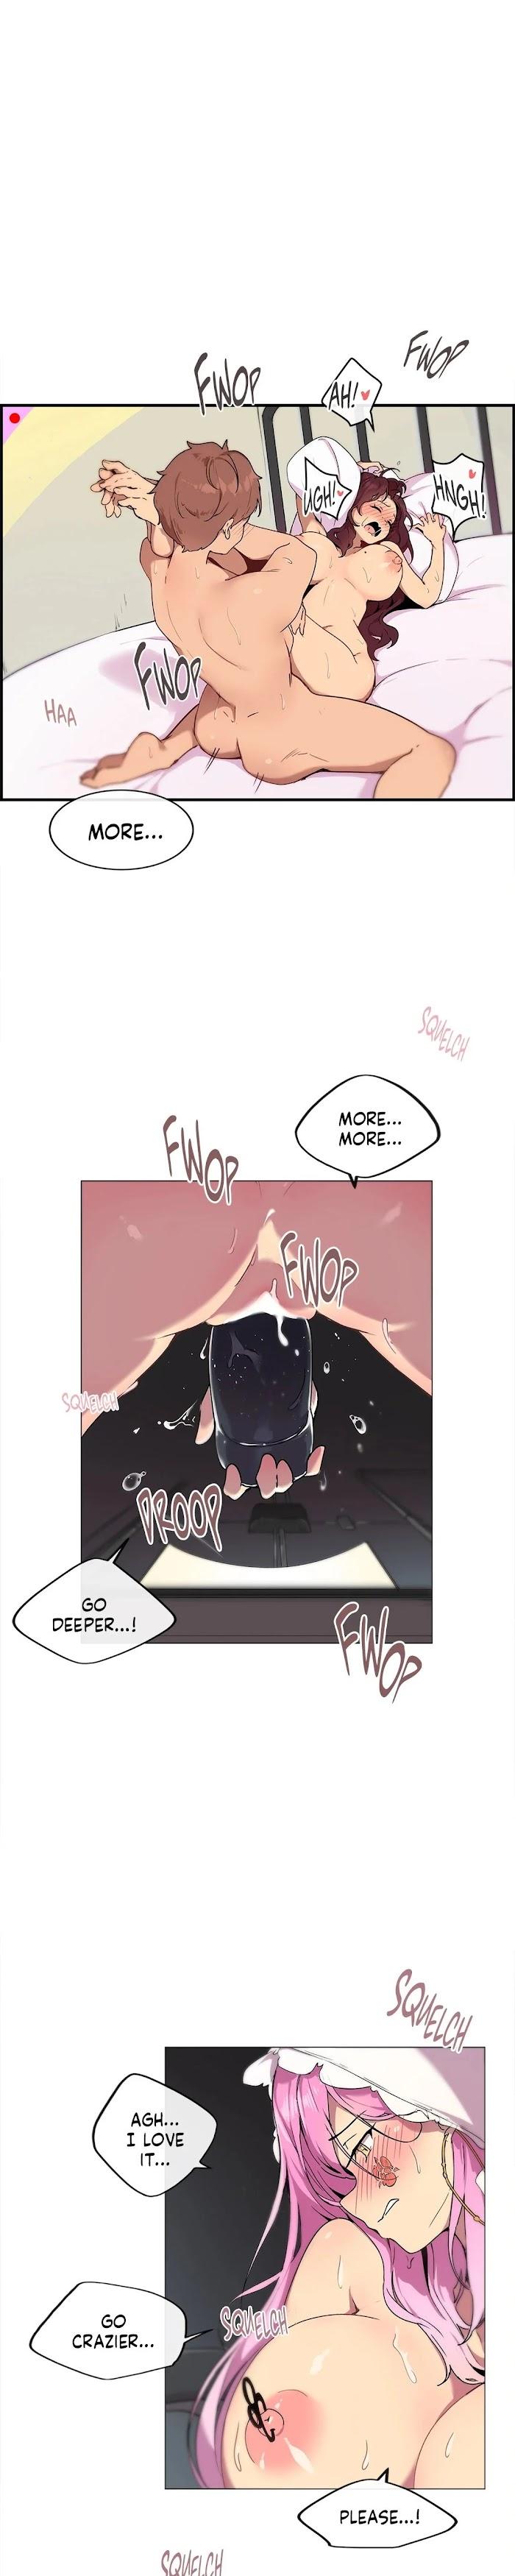 [Dumangoon, 130F] Sexcape Room: Wipe Out Ch.9/9 [English] [Manhwa PDF] Completed 168